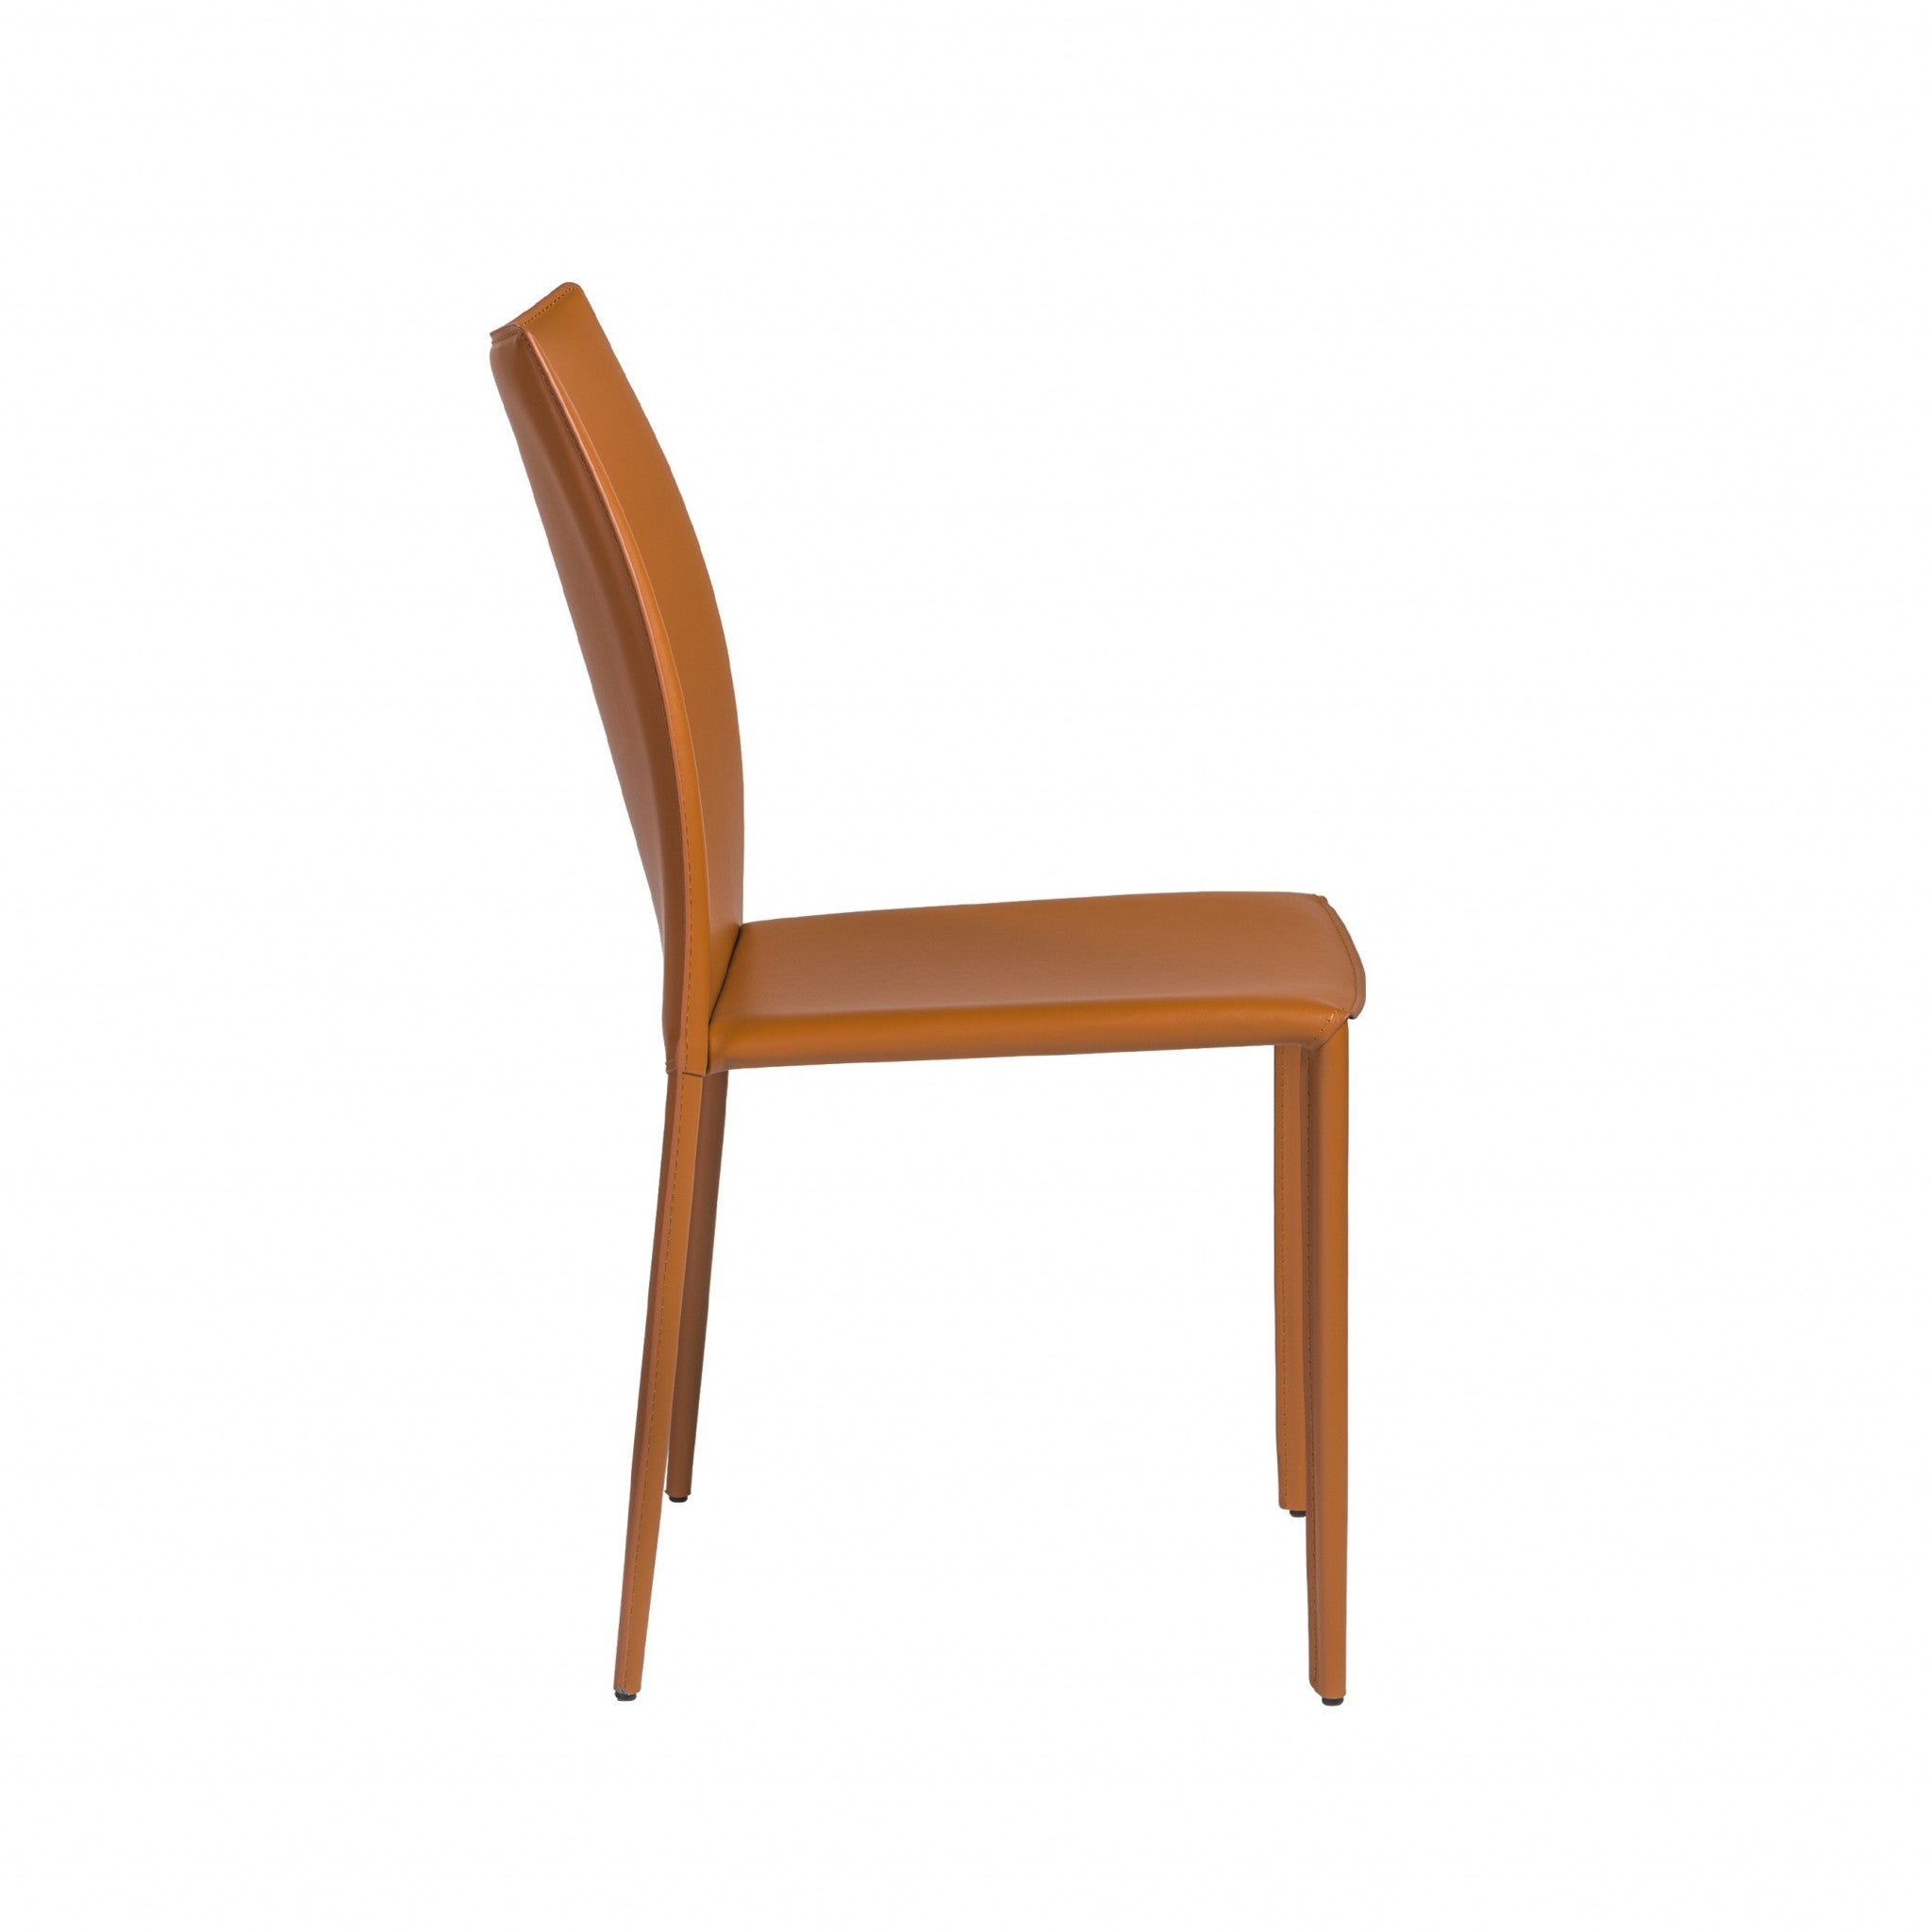 Set of Two Premium All Terra Cotta Stacking Dining Chairs